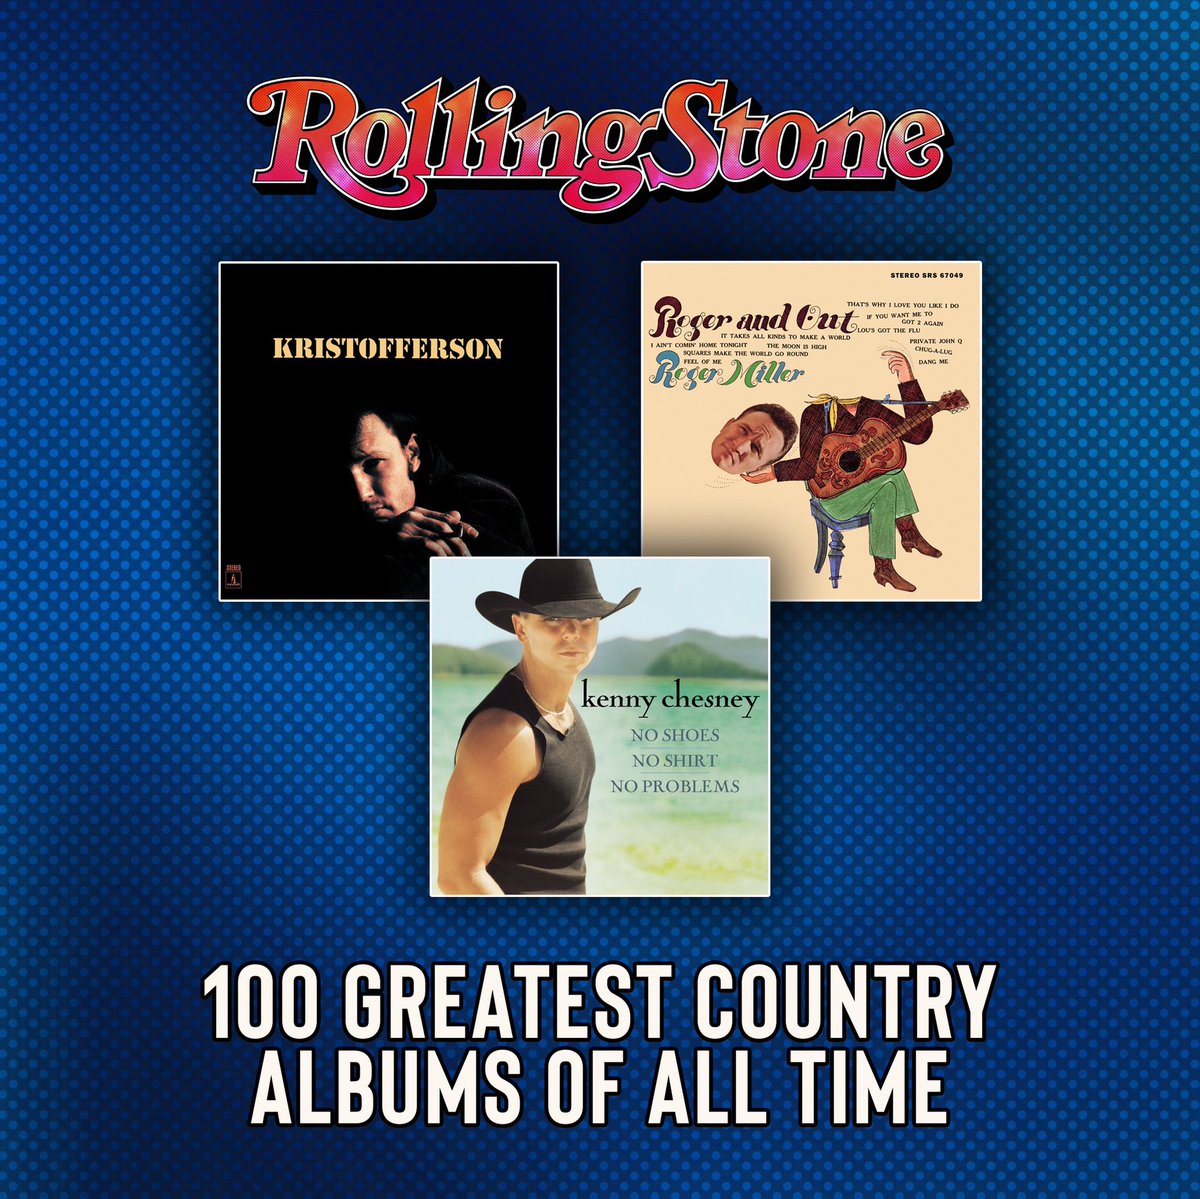 Albums from @kennychesney, @kkristofferson and @therogermiller each made @rollingstone’s list of The 100 Greatest Country Albums of All Time. ✨ #teammhm